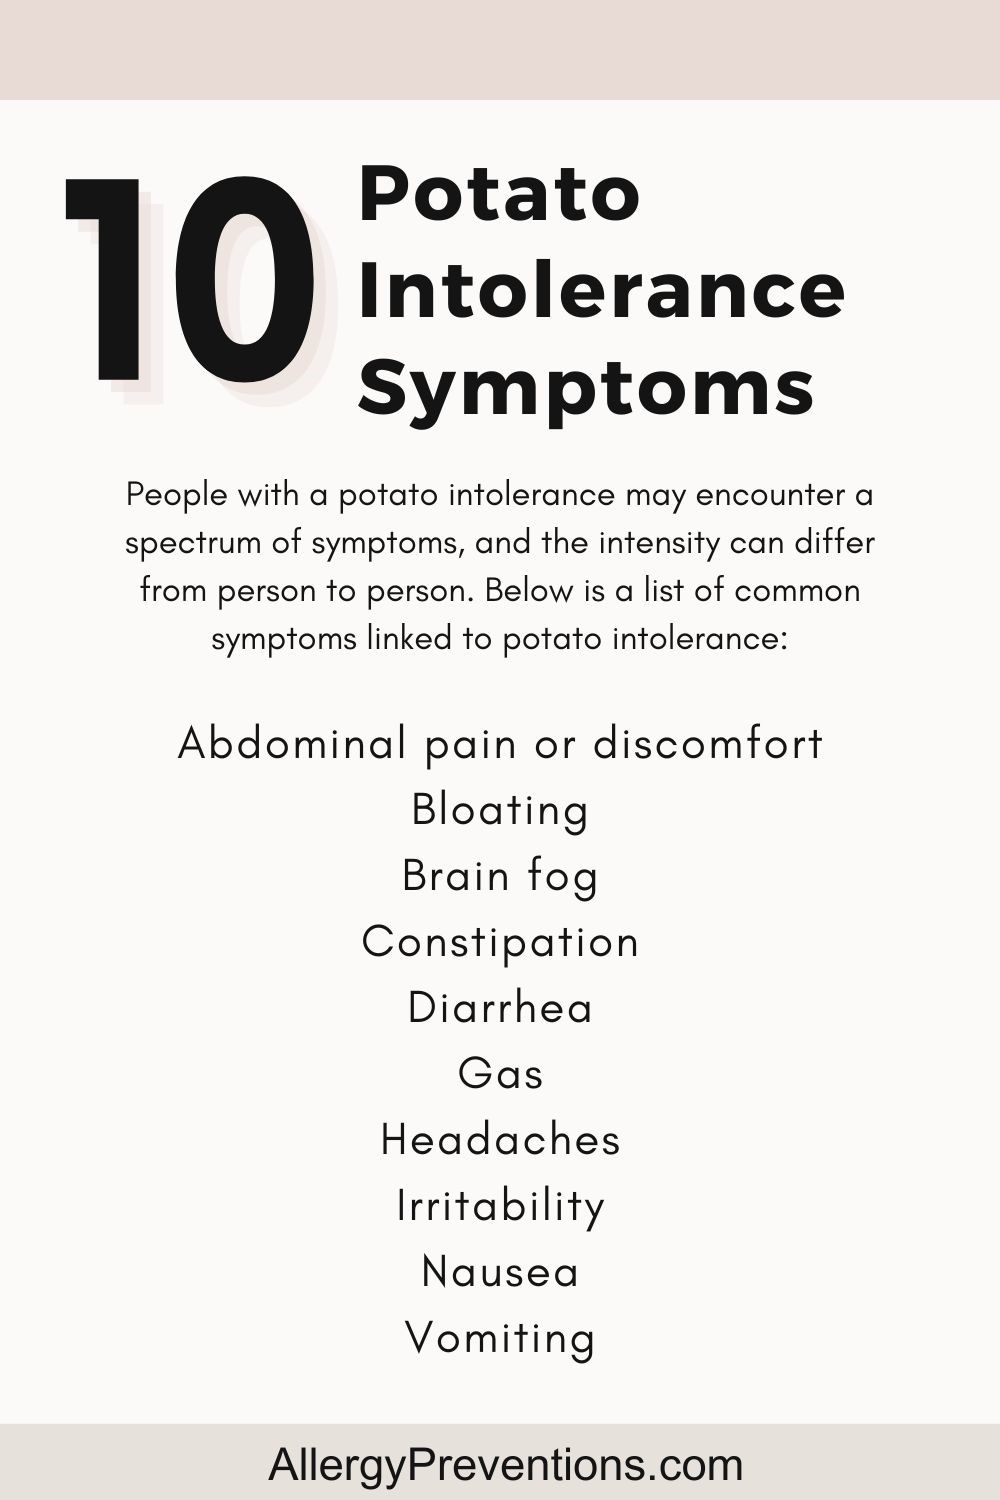 Potato intolerance symptoms infographic: People with a potato intolerance may encounter a spectrum of symptoms, and the intensity can differ from person to person. Below is a list of common symptoms linked to potato intolerance: Abdominal pain or discomfort, Bloating, Brain fog, Constipation, Diarrhea, Gas, Headaches, Irritability, Nausea, and Vomiting.